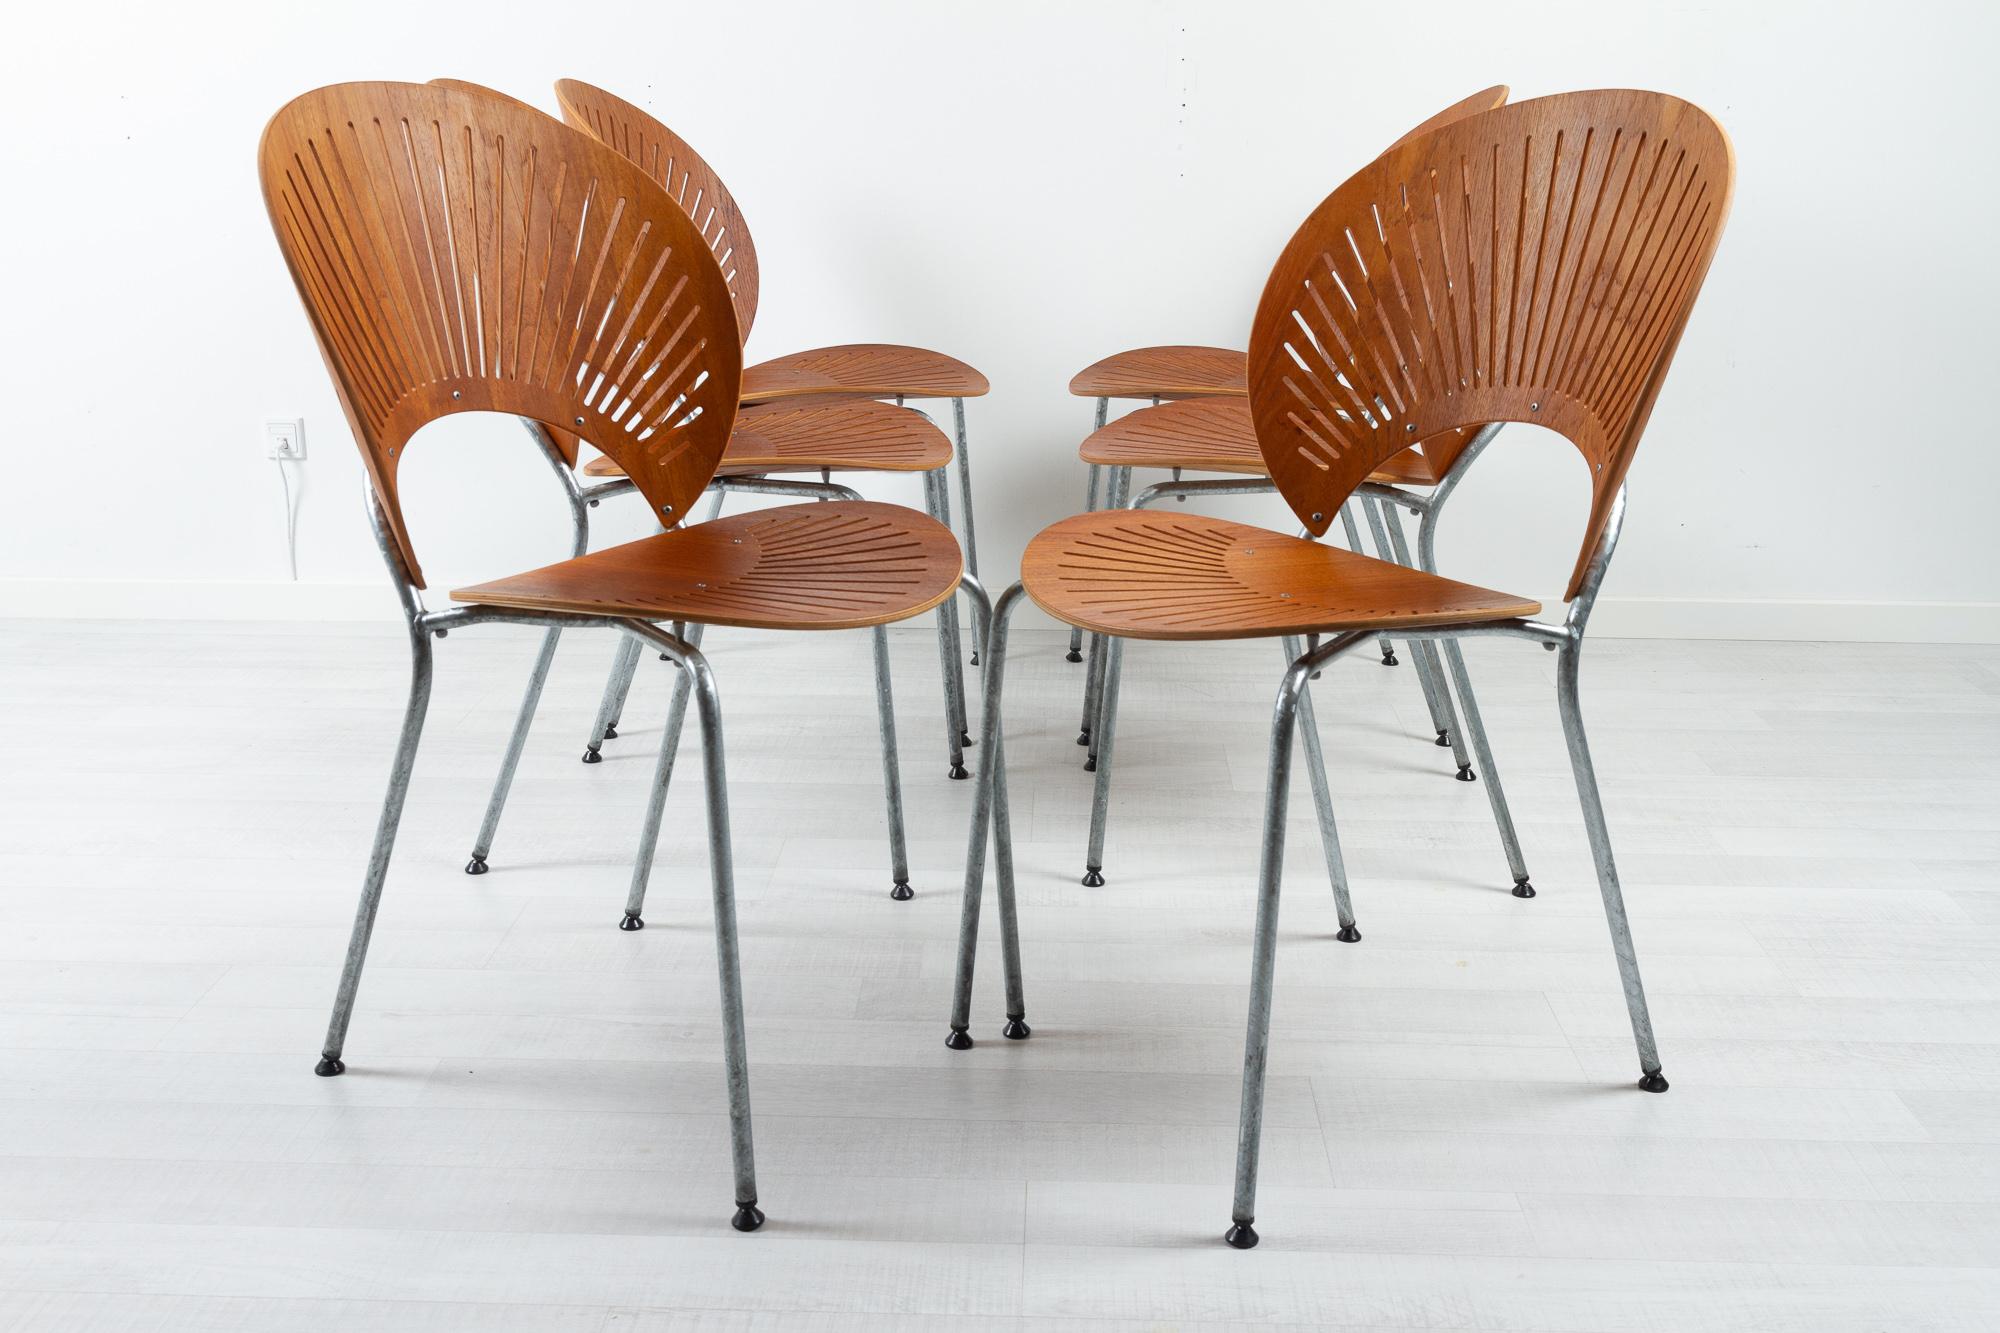 Trinidad Teak Dining Chairs by Nanna Ditzel 1990s Set of 6 For Sale 8